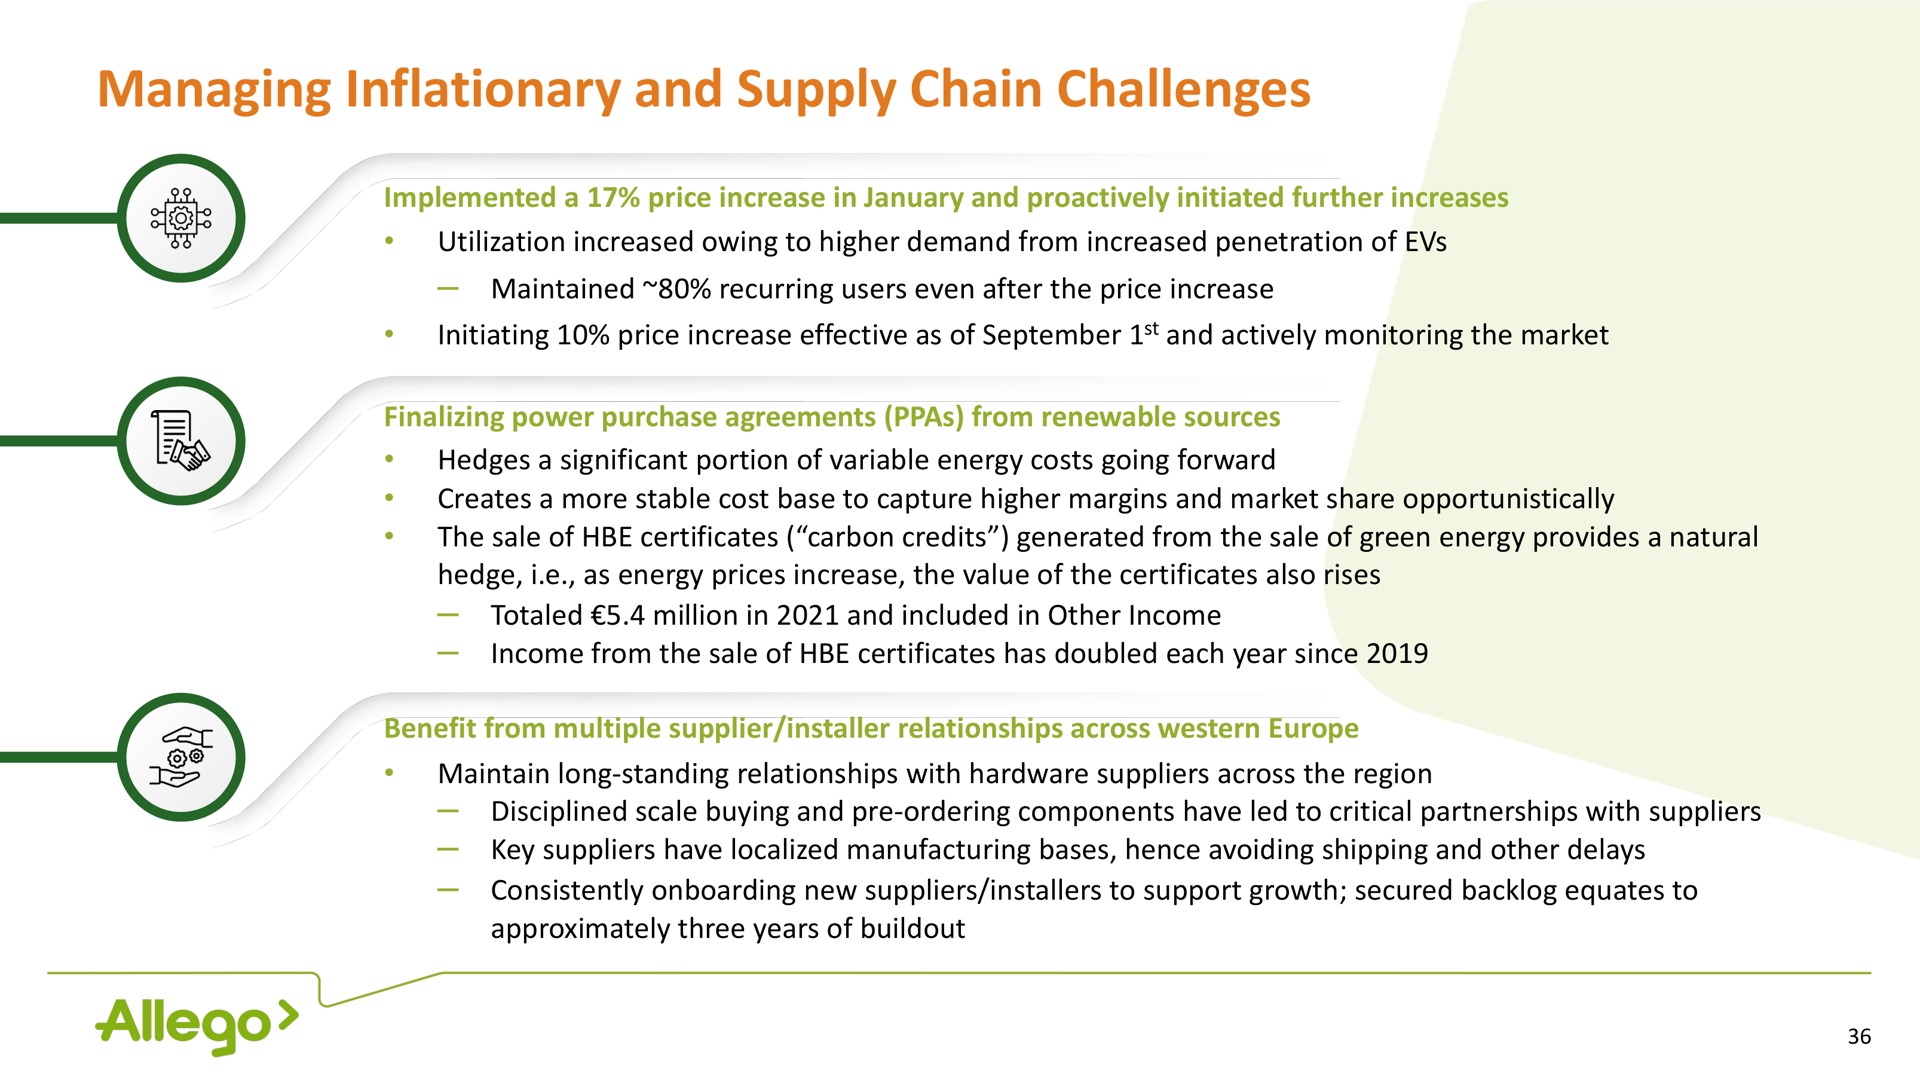 managing inflationary and supply chain challenges | Allego